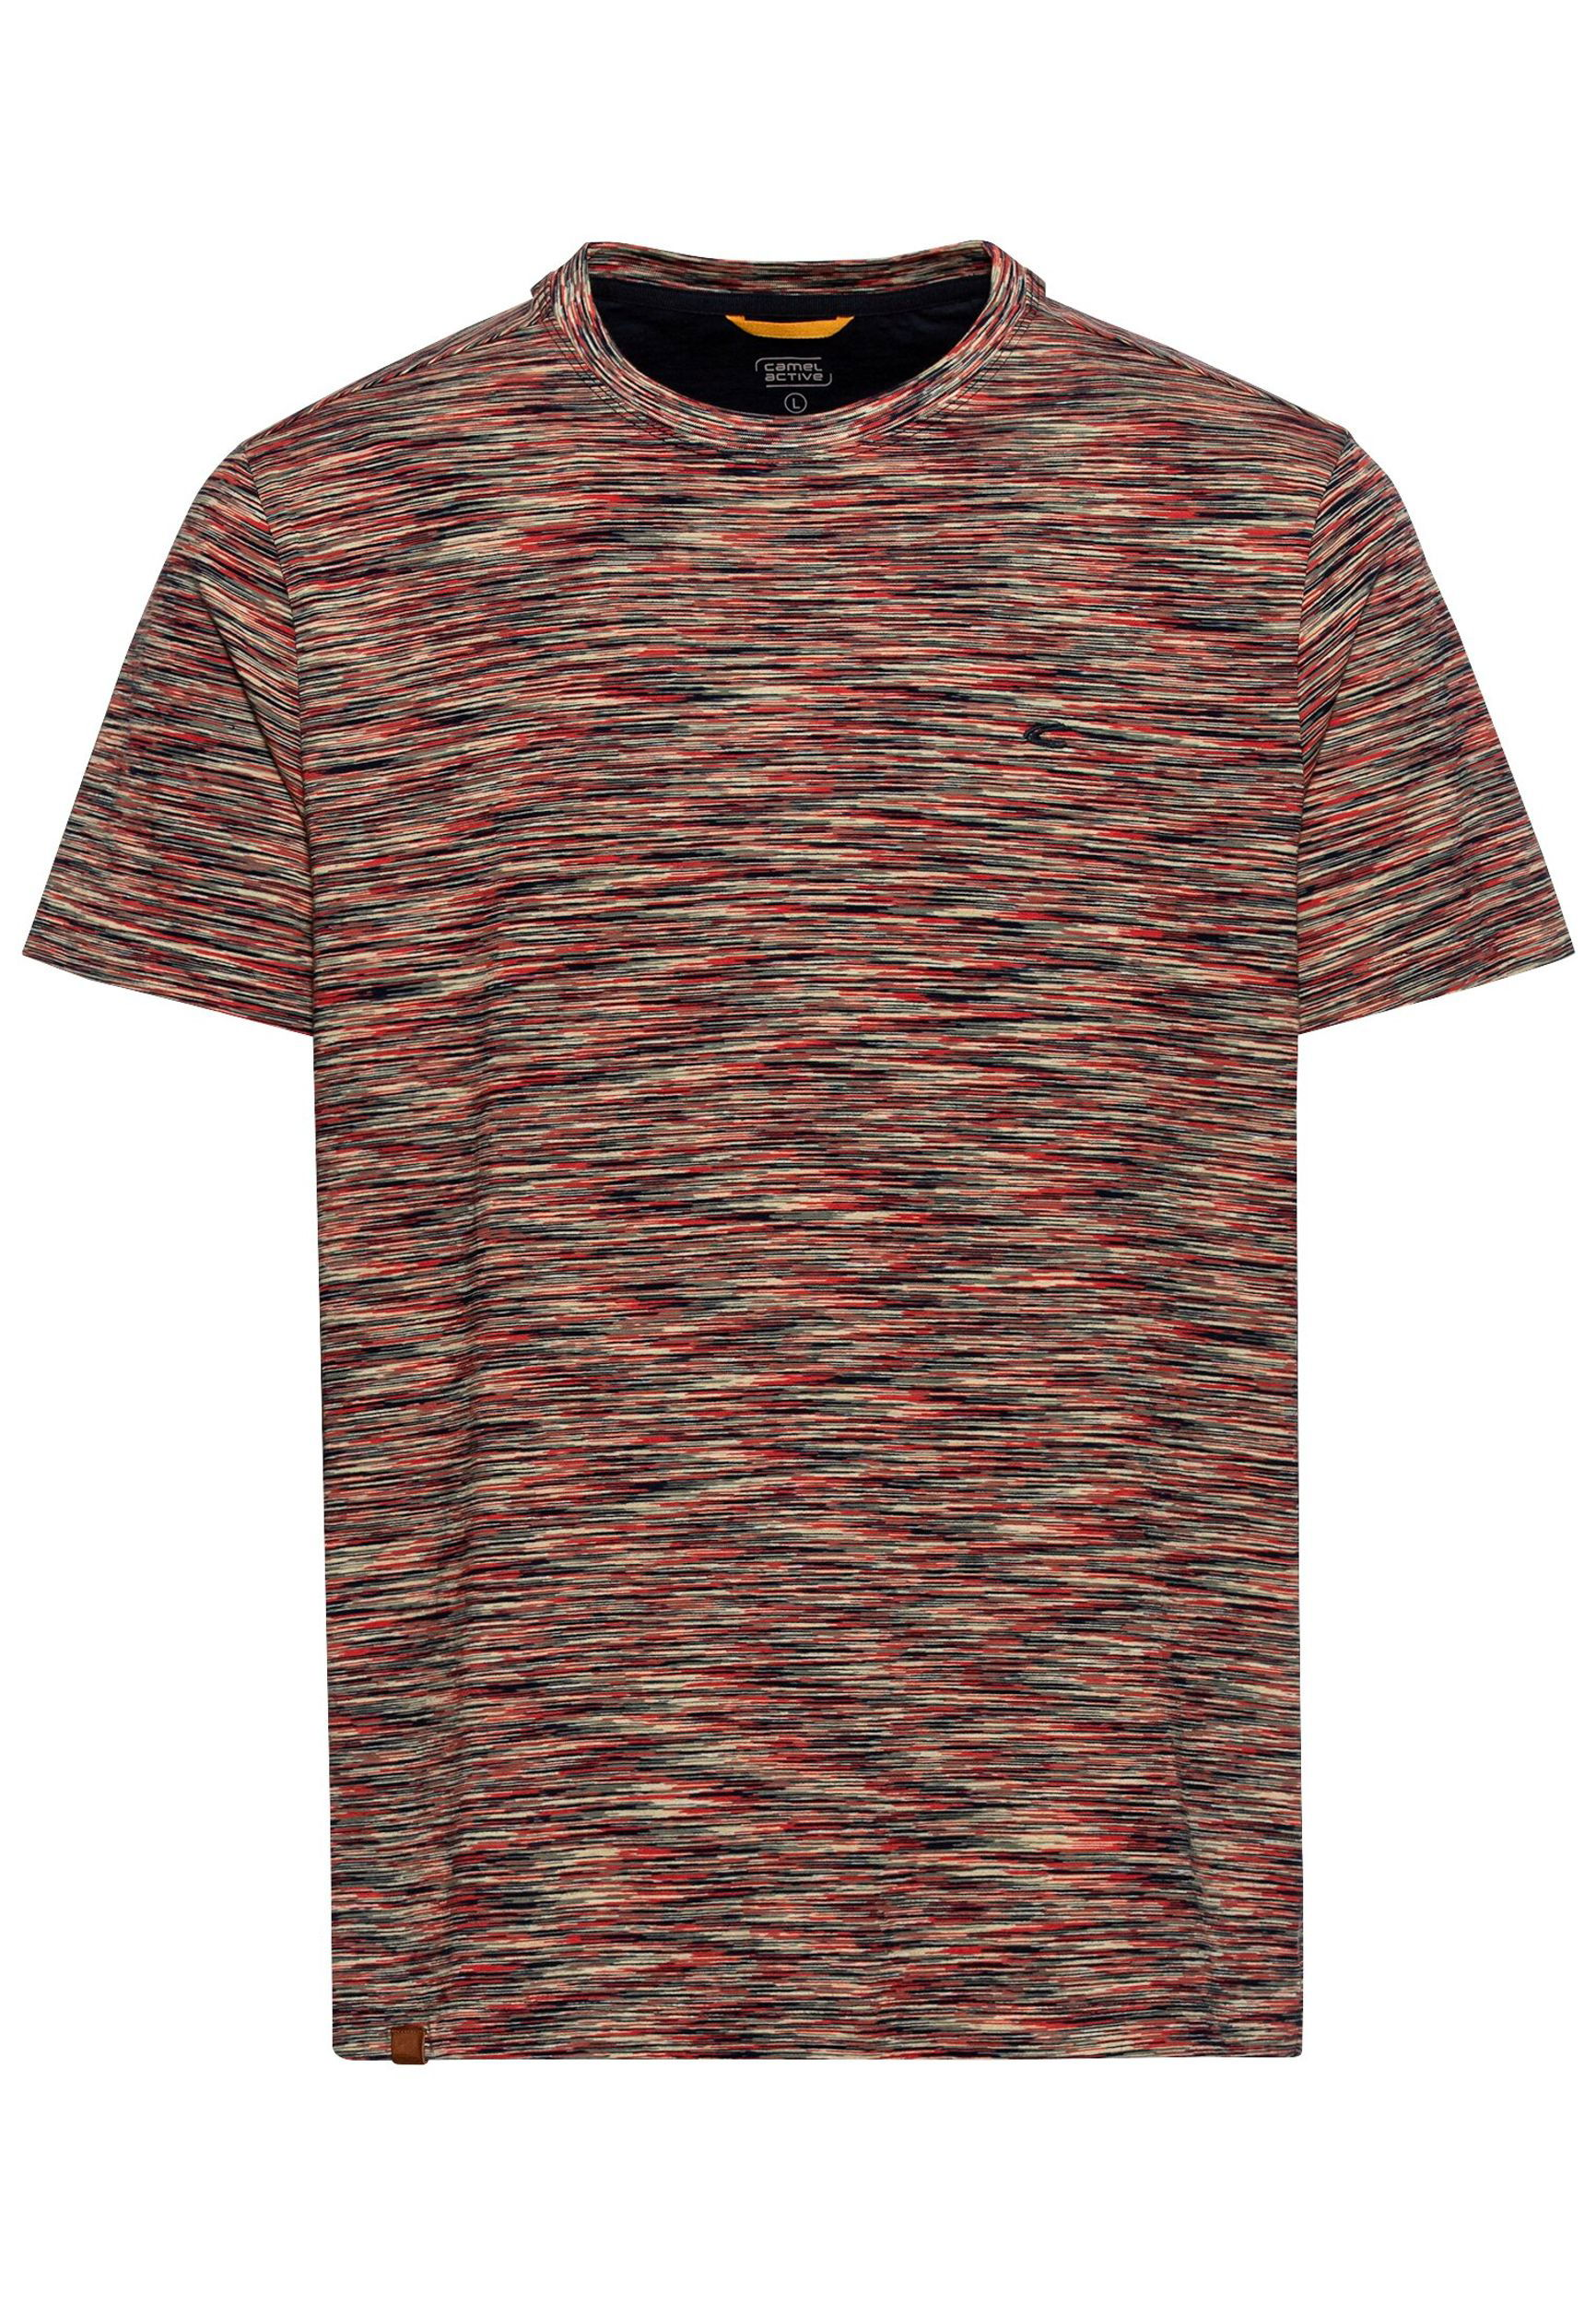 Camel Active |  Camel Active Shirt  | L | faded red